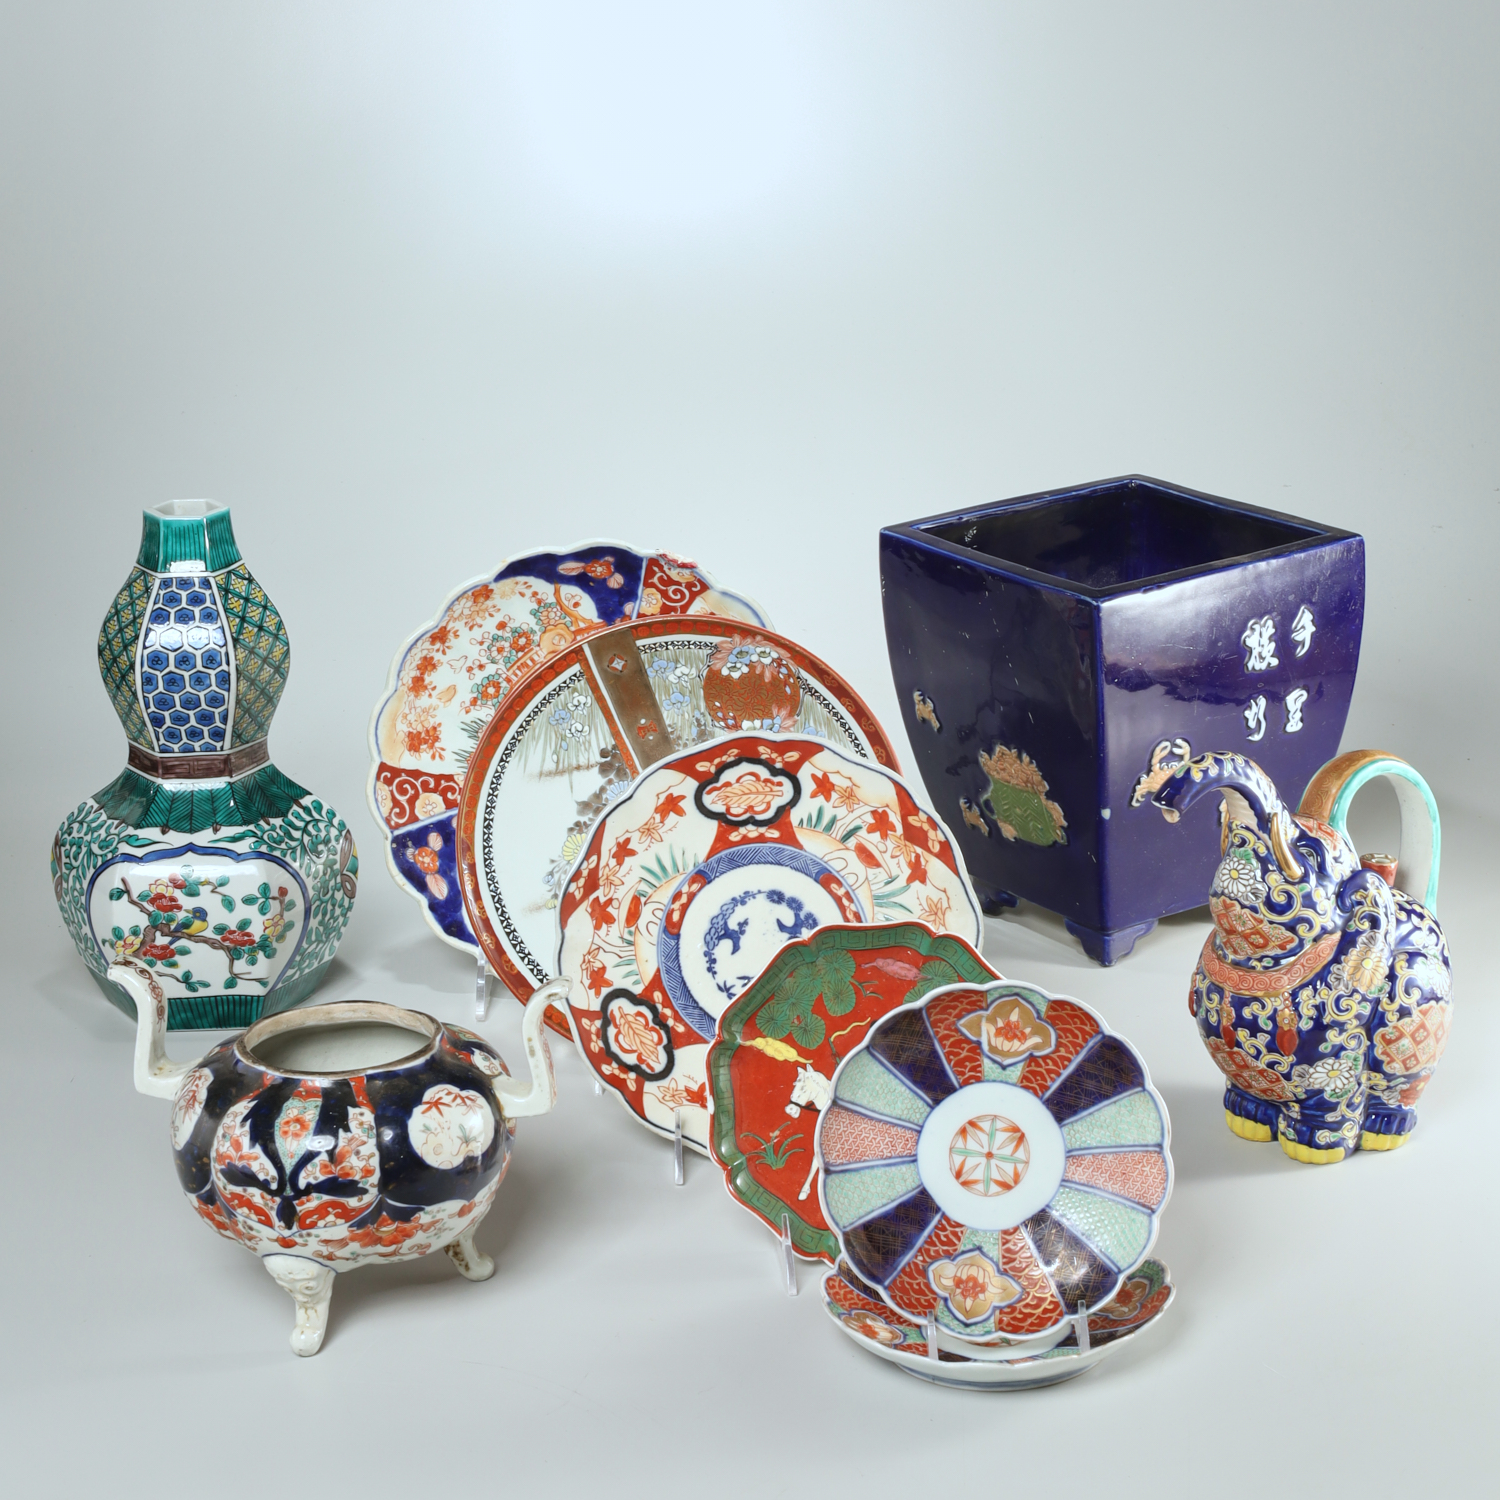 JAPANESE PORCELAIN GROUPING 19th/20th